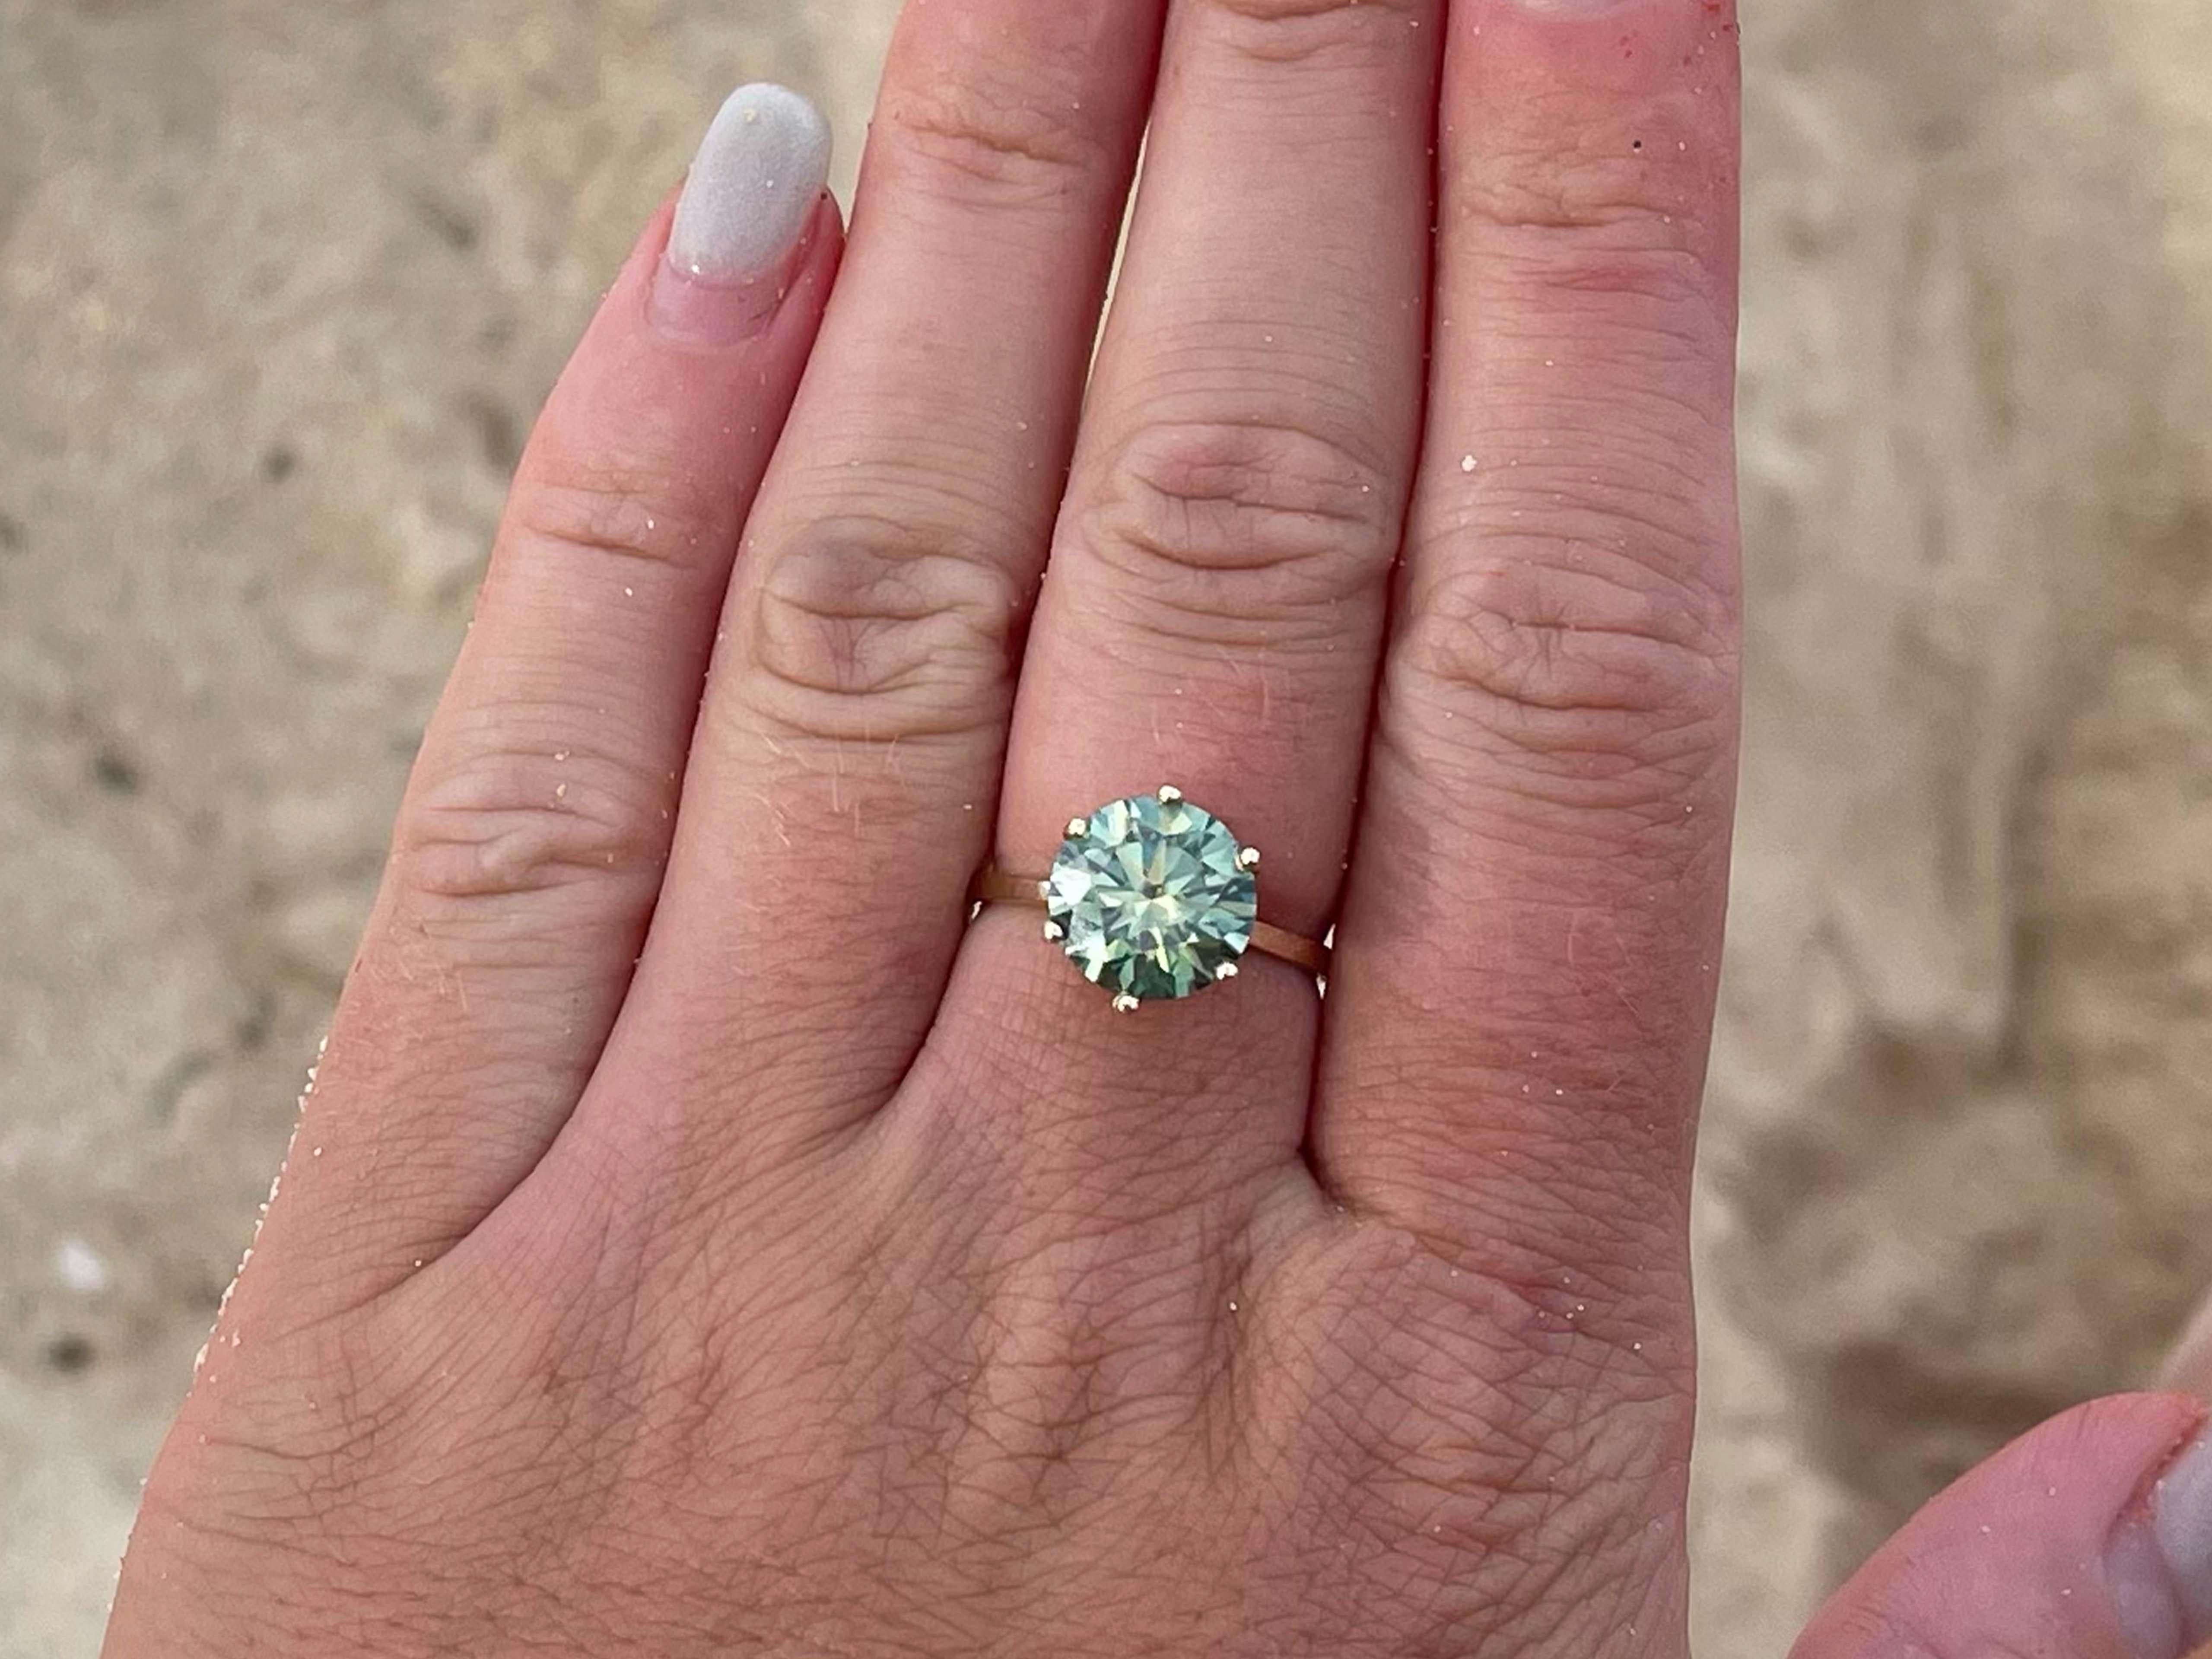 Item Specifications:

Metal: 14K Yellow Gold

Total Weight: 2.3 Grams
​
​Ring Size: 7

Moissanite Carat Weight: ~0.60 Carat

Moissanite Color: Fancy intense green

Moissanite Clarity: VS1

Condition: Preowned, excellent
​
​Stamped: 